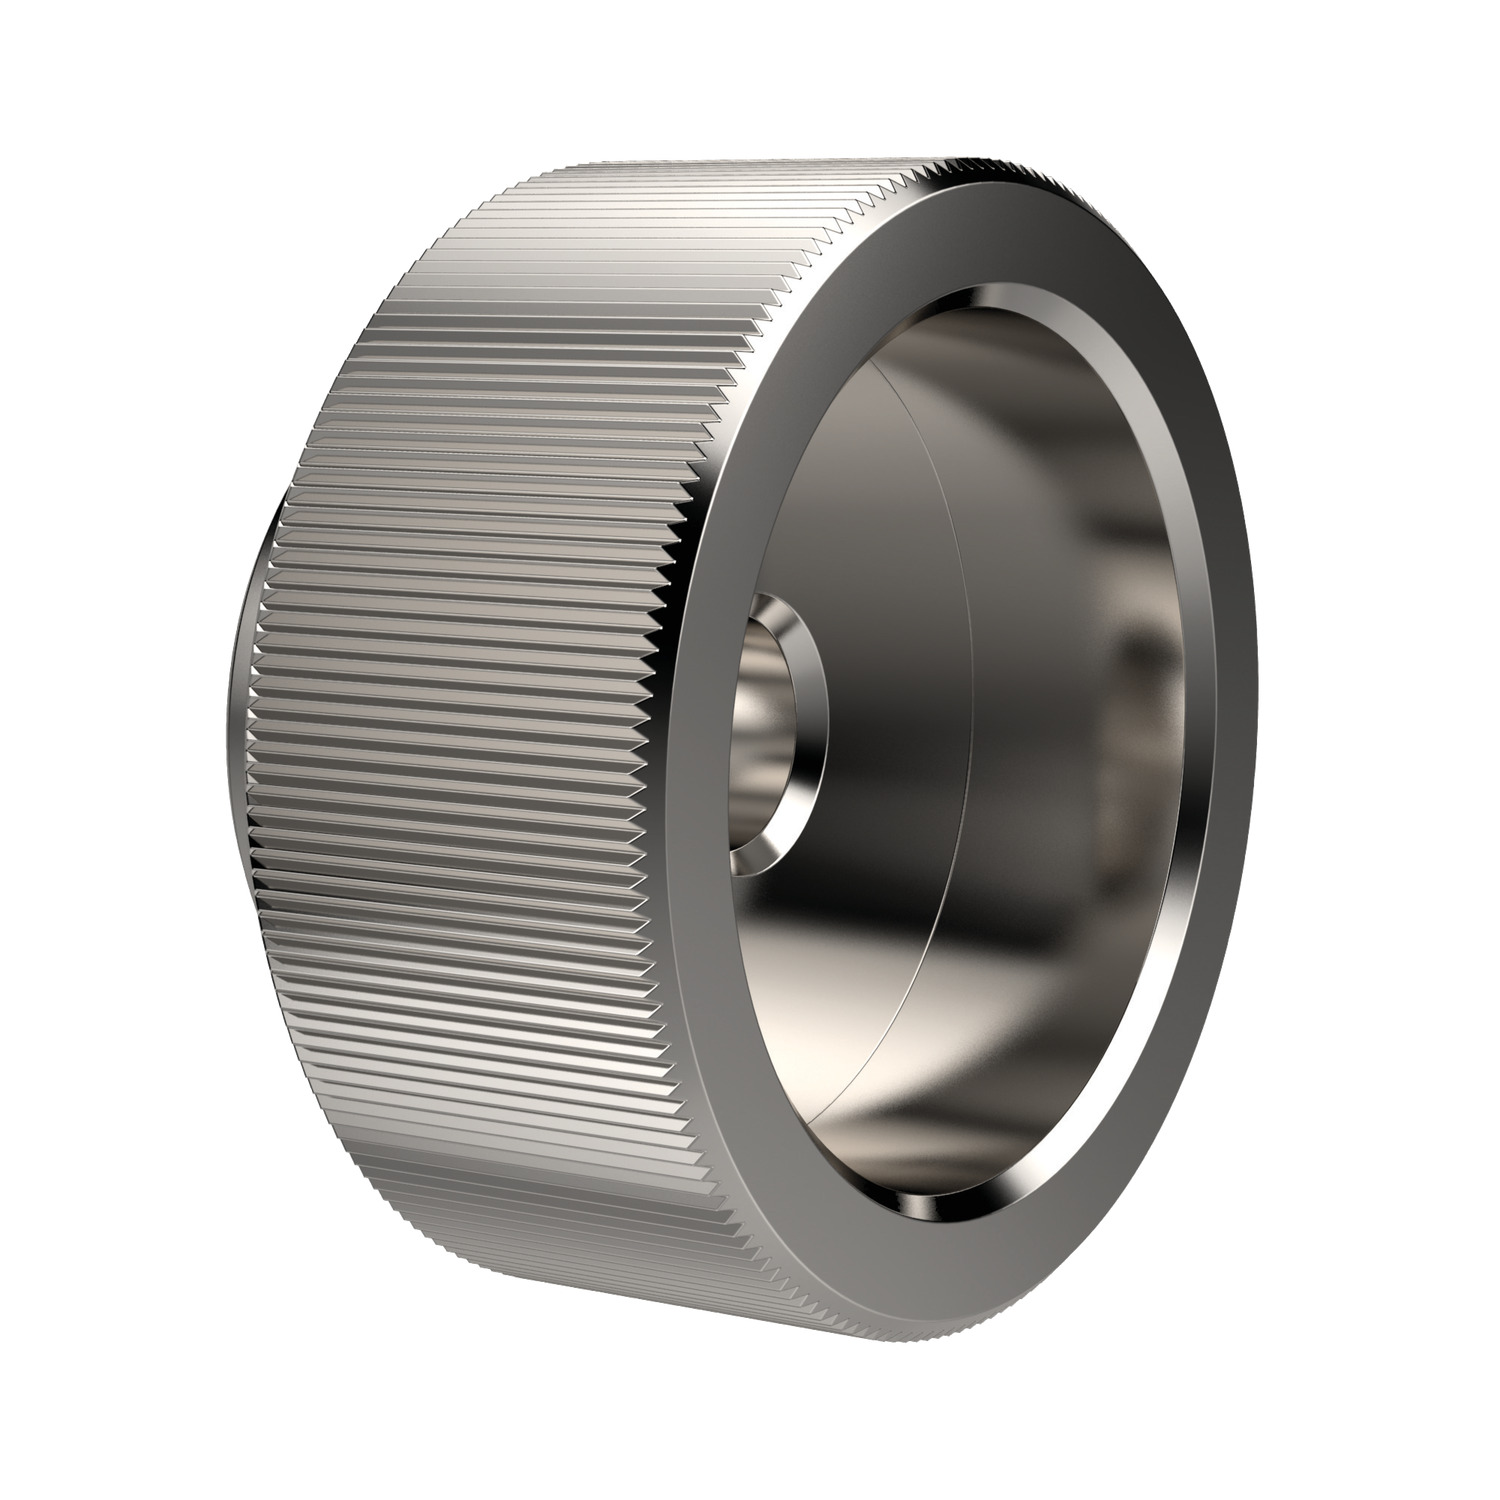 P0409.006-A2 Knurled Nuts with Collar M6 A2 s/s 